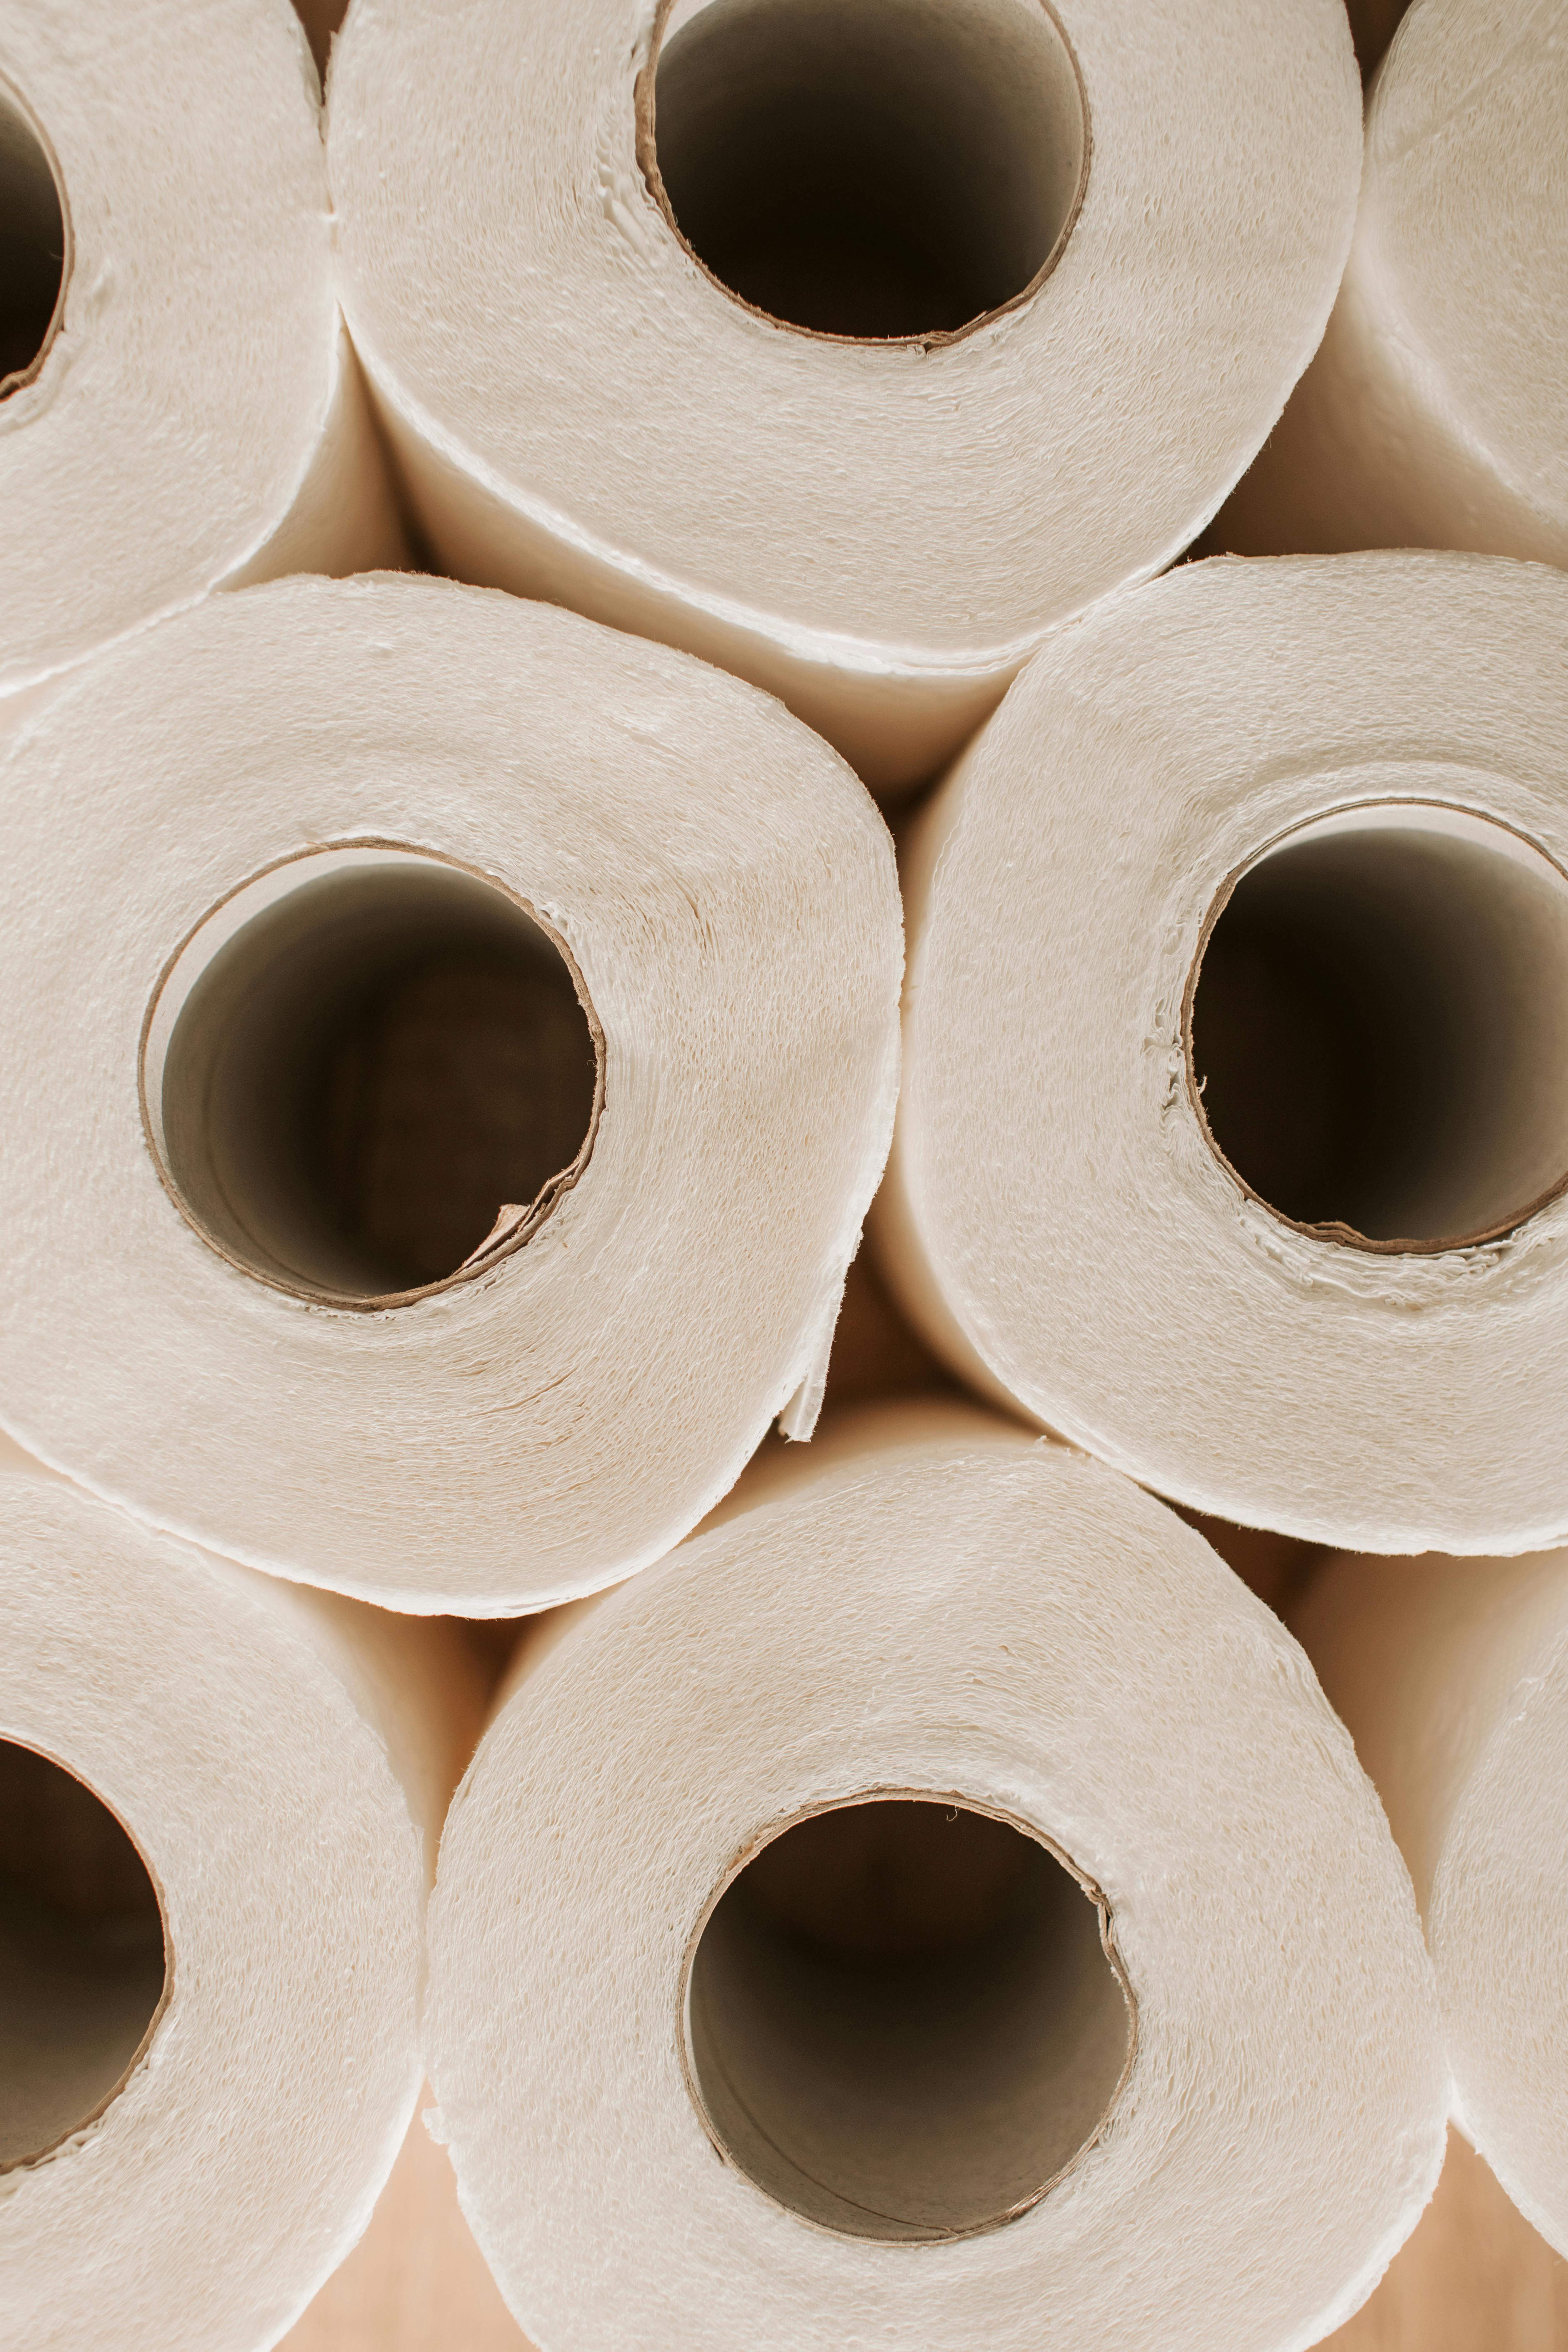 A bunch of toilet paper | Source: Pexels